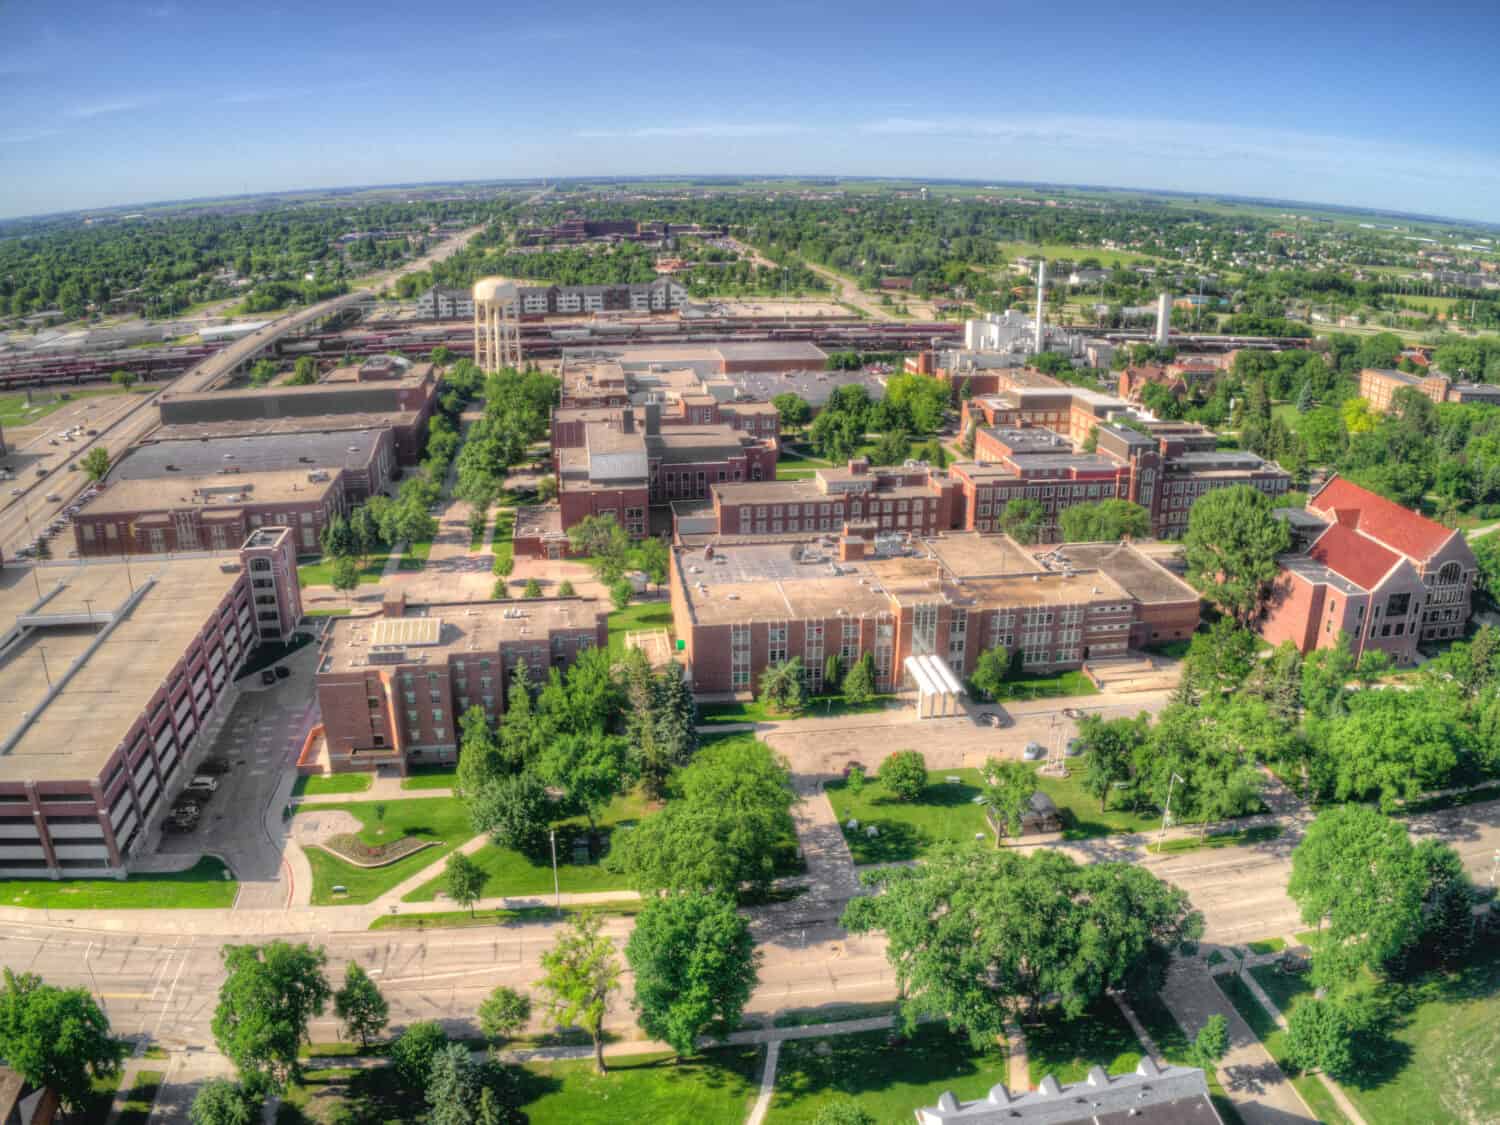 Aerial Drone View of the University of North Dakota in Grand Forks during the Summer